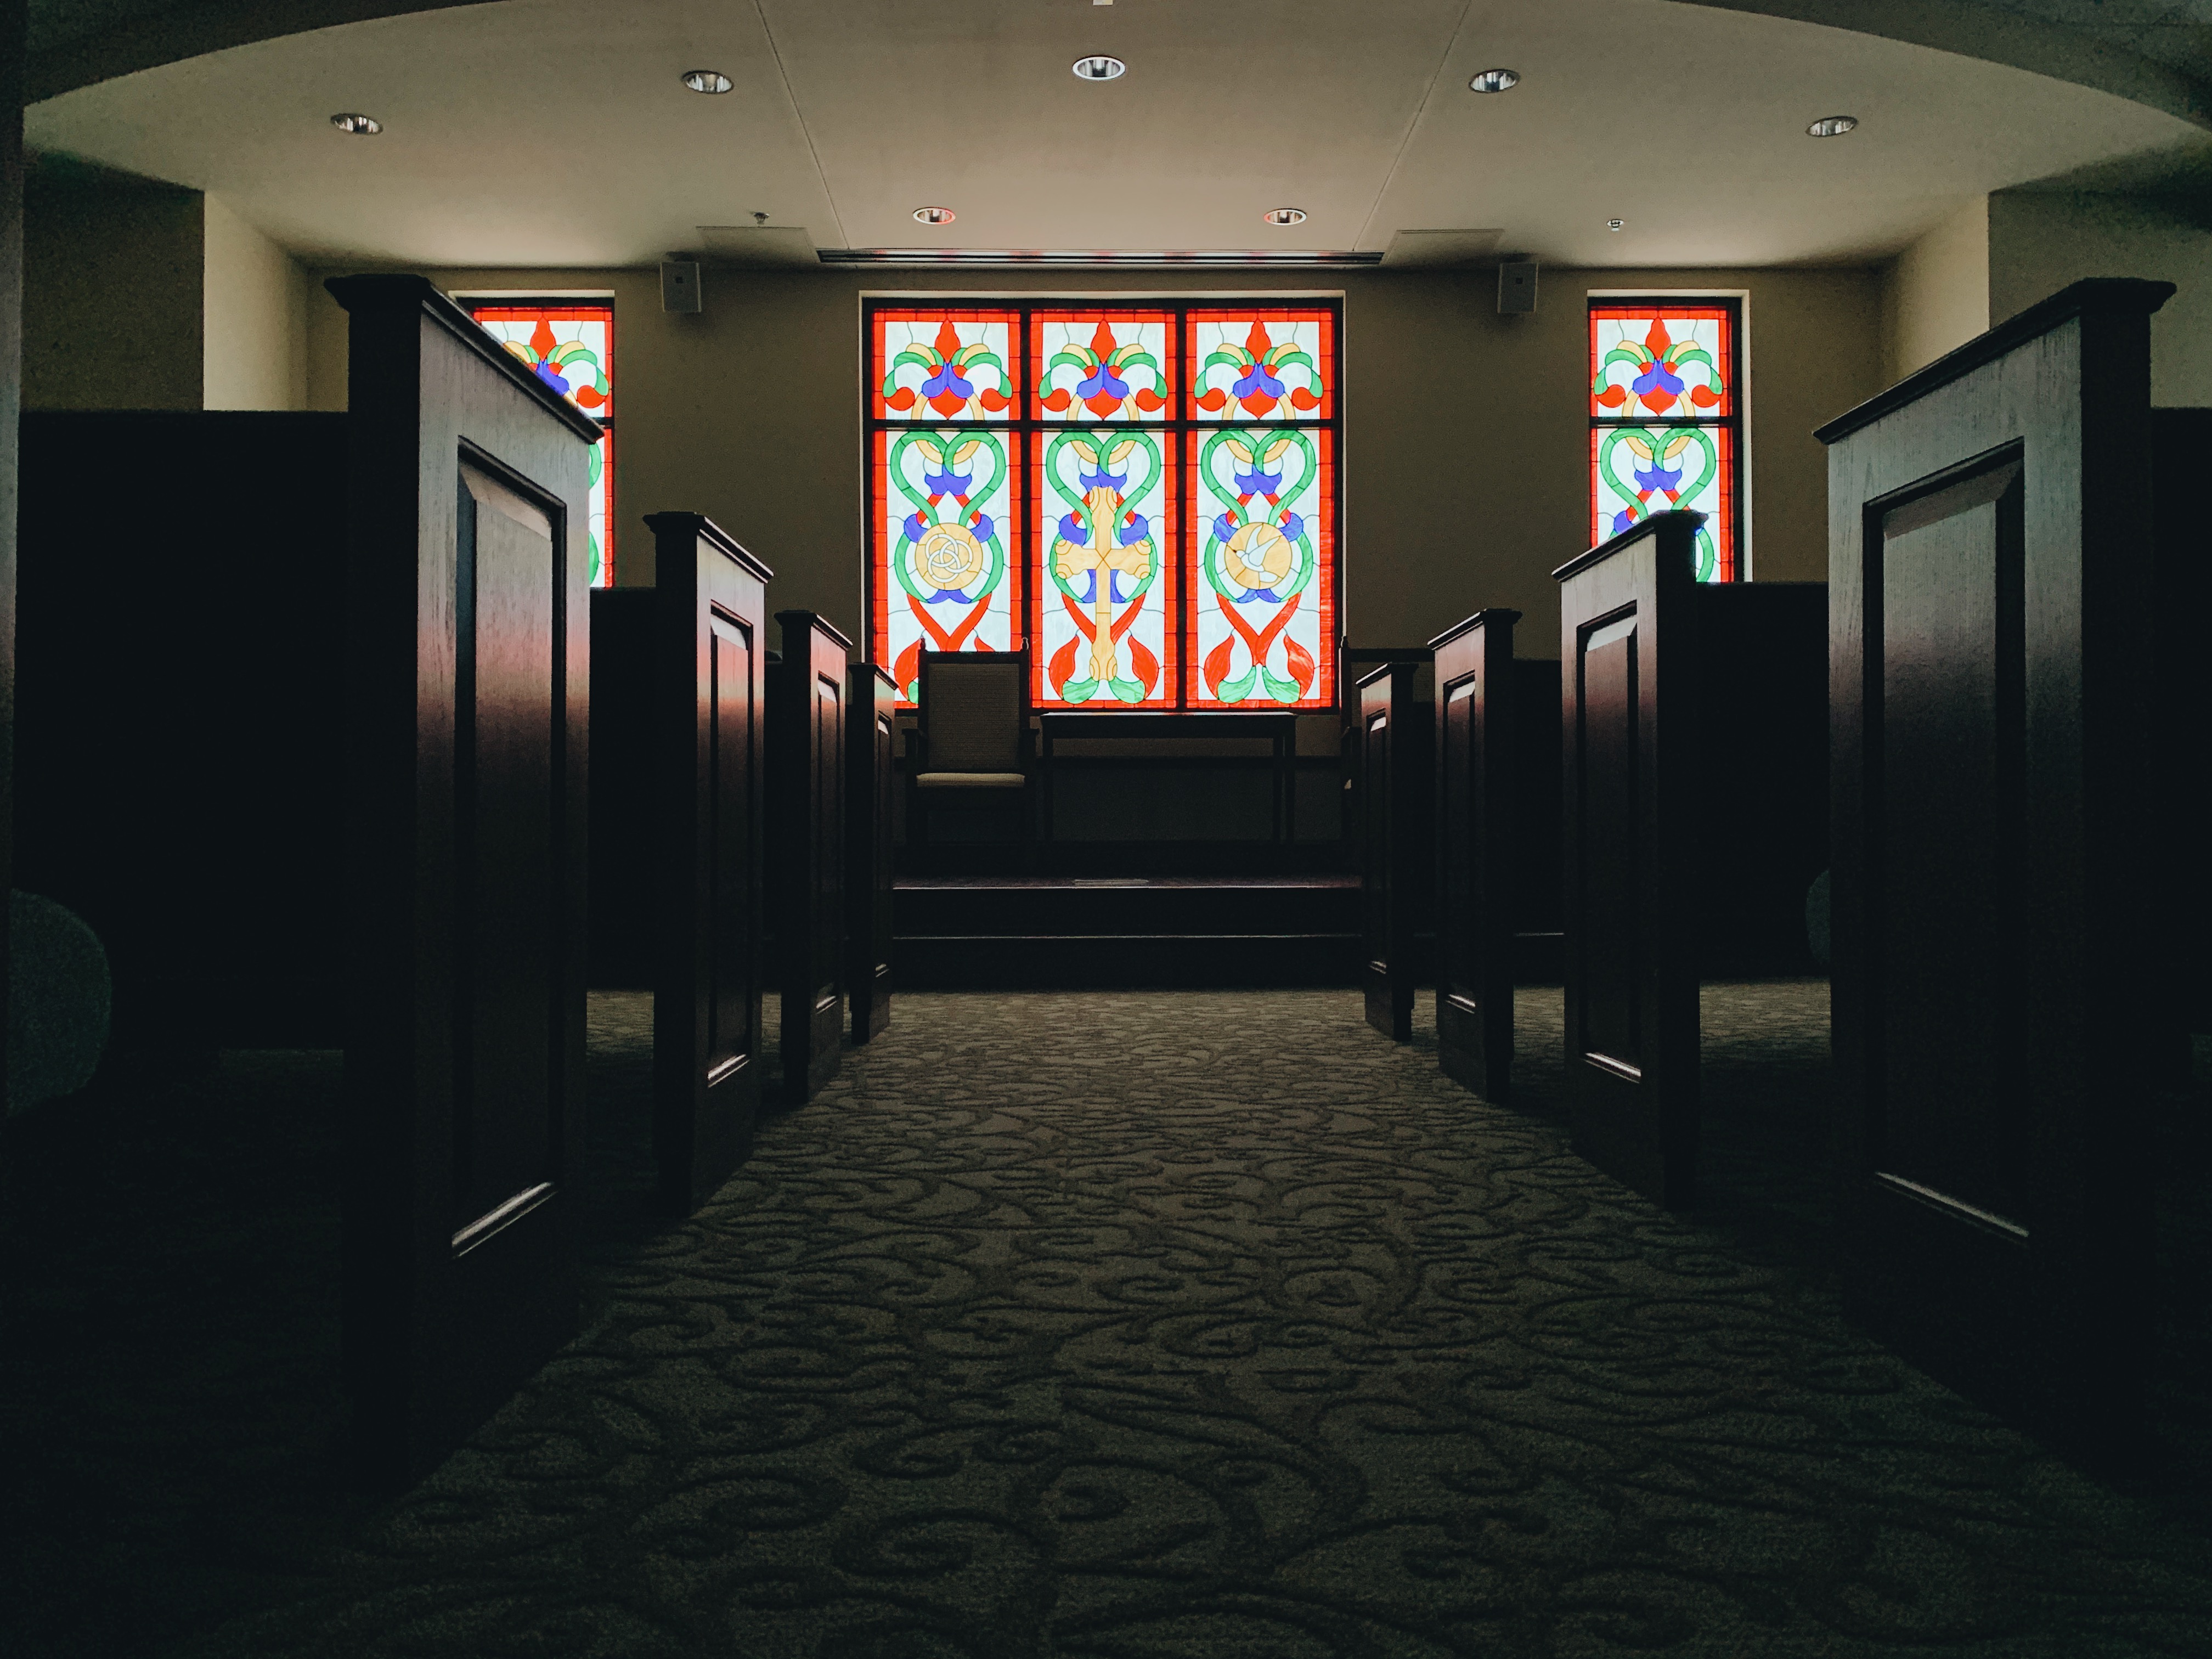 Stacy Riddle Forum's McCall Chapel